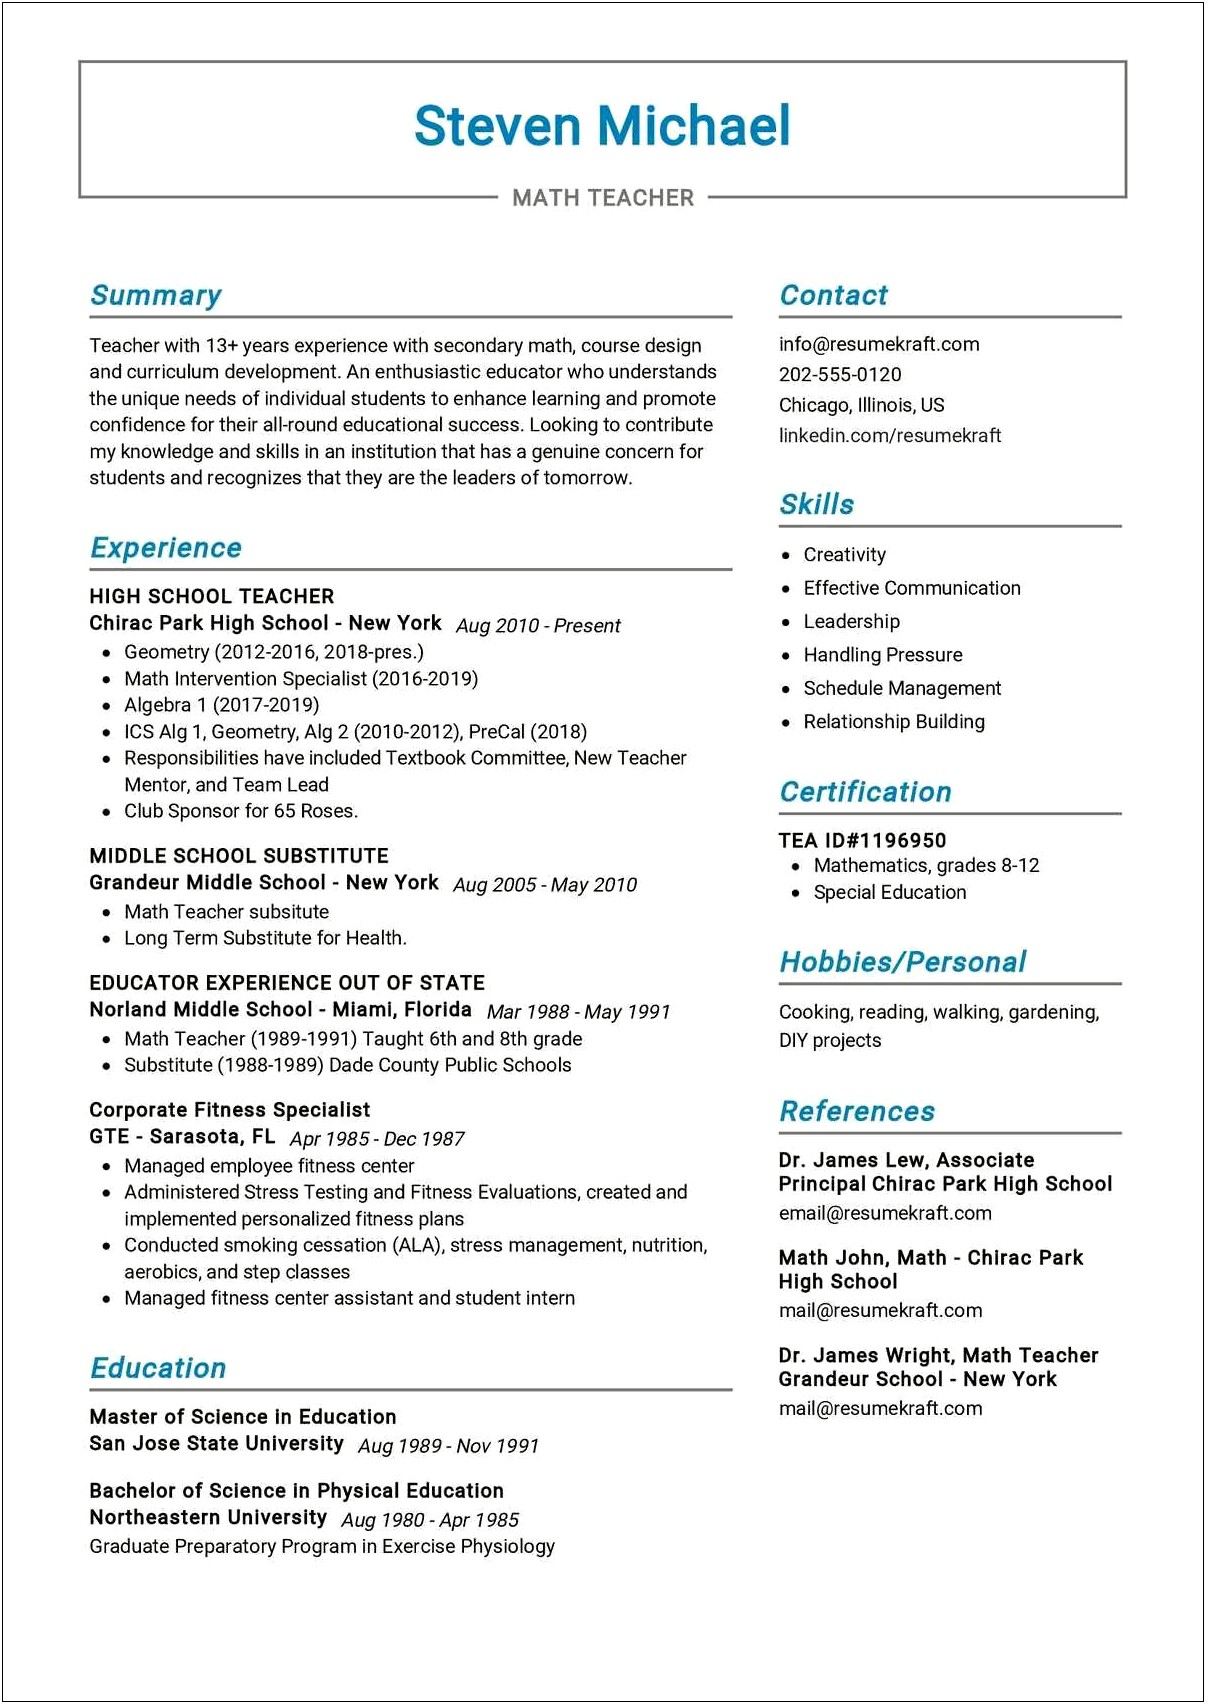 Resume For Elementary Principal With No Experience